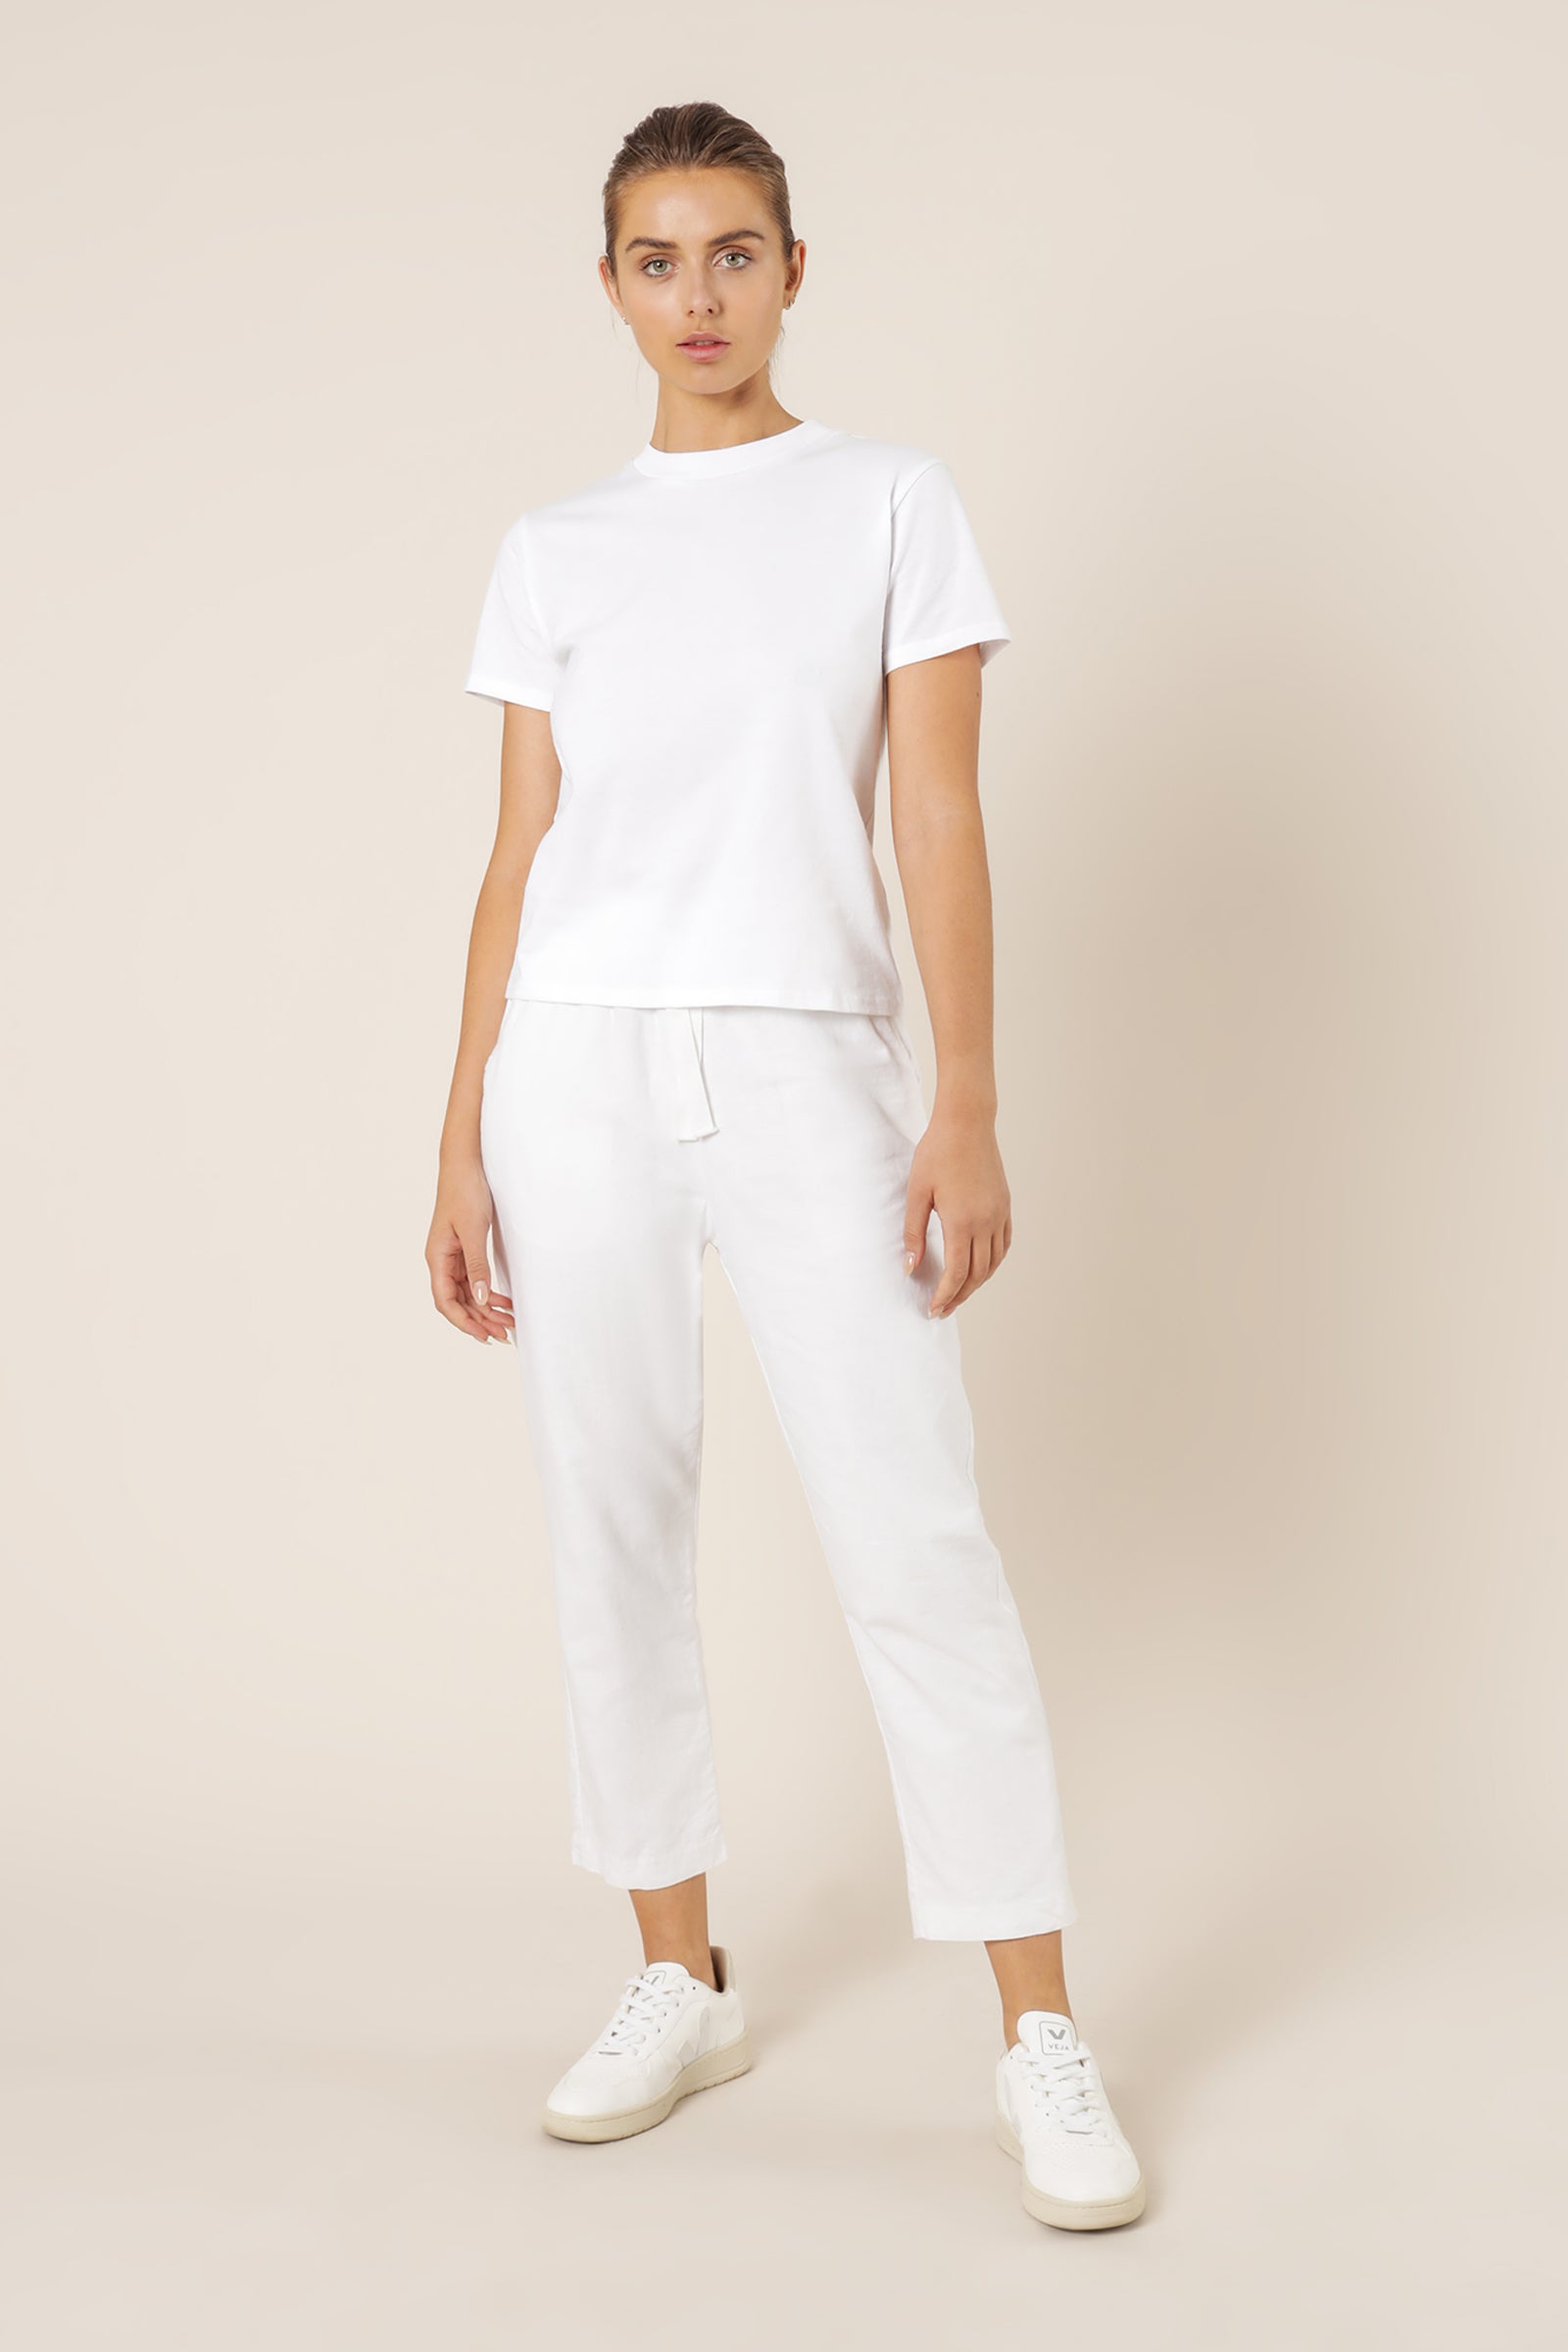 Nude Lucy Kendall Crew Neck Tee White Top 